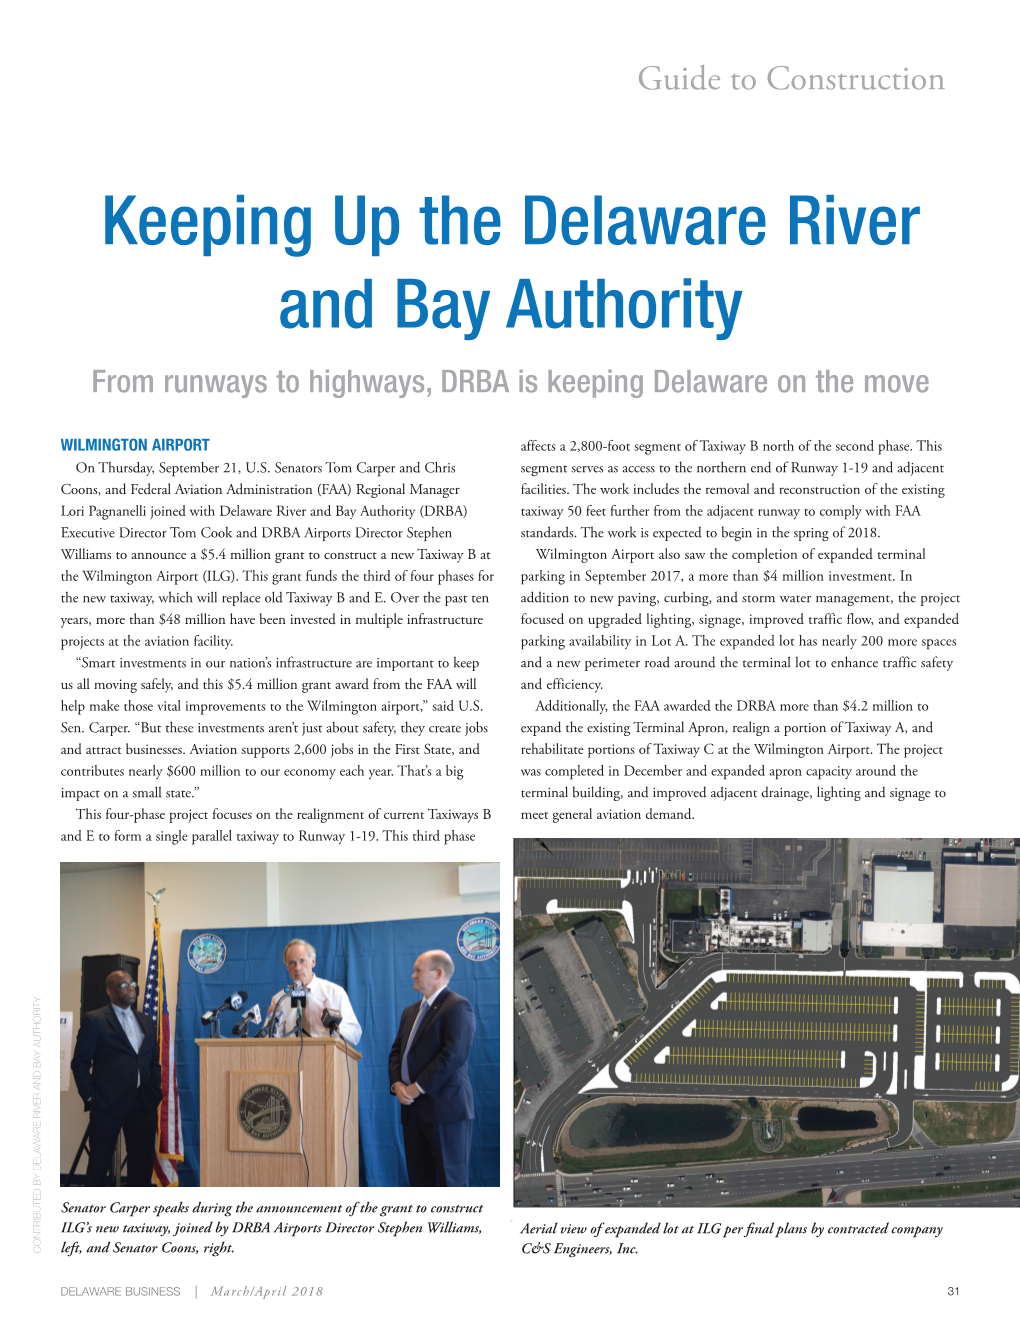 Keeping up the Delaware River and Bay Authority from Runways to Highways, DRBA Is Keeping Delaware on the Move